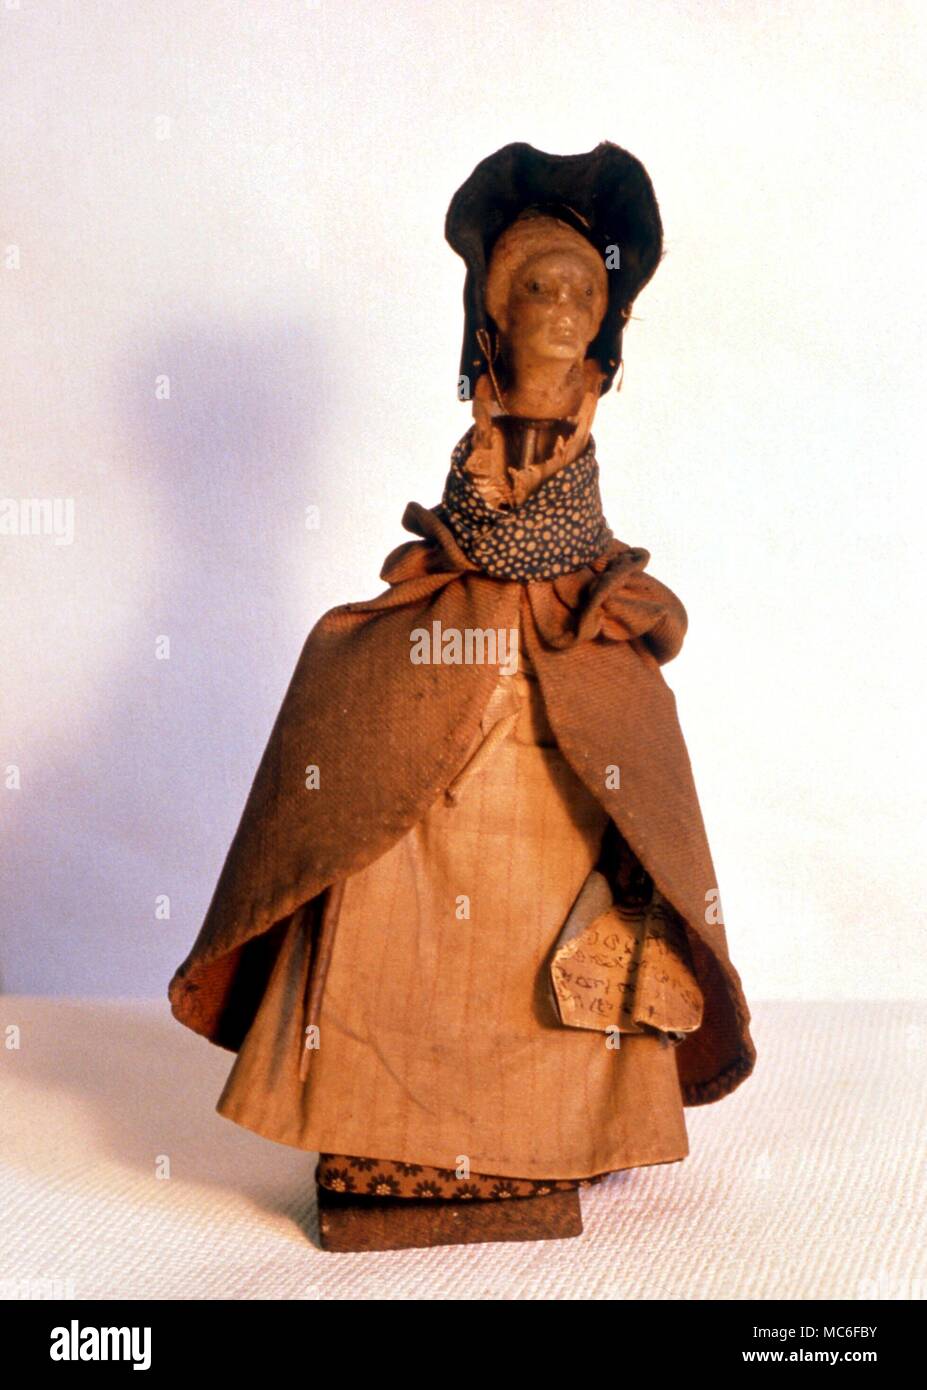 WITCHCRAFT - A witchcraft doll, or poppet, used by witches, who would name the doll (often by inserting a written name into the dress) and then mutilate it, to bring pain or death to the named victim Stock Photo